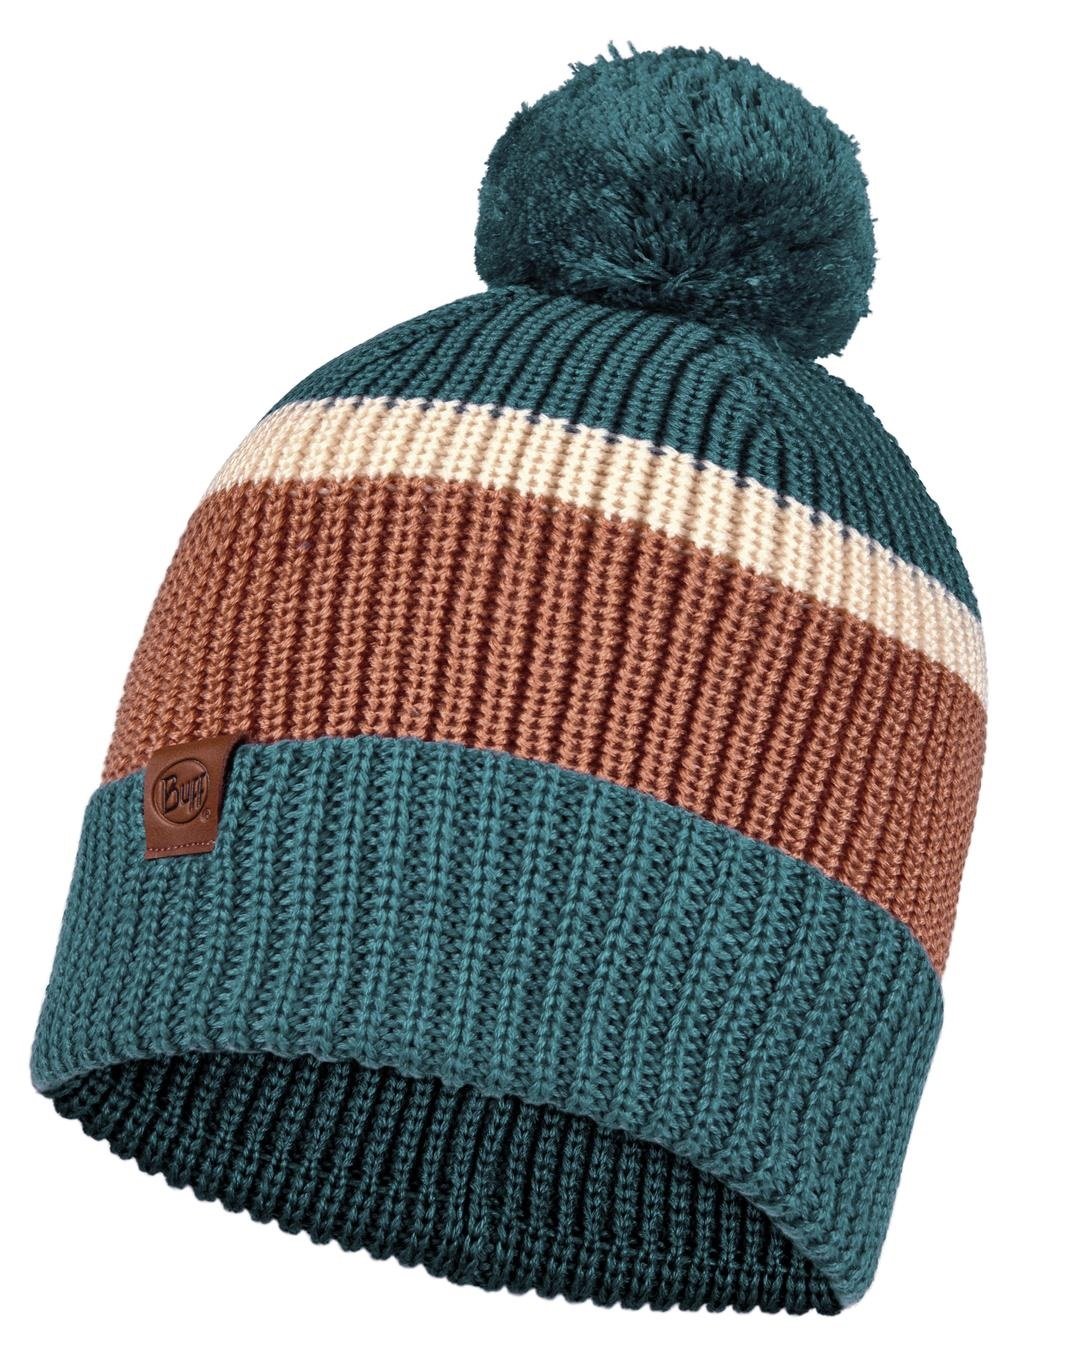 Шапка Buff Knitted Hat Elon Dusty Blue, US:One size, 126464.742.10.00 шапка buff knitted hat nerla nerla grey us one size 132335 937 10 00